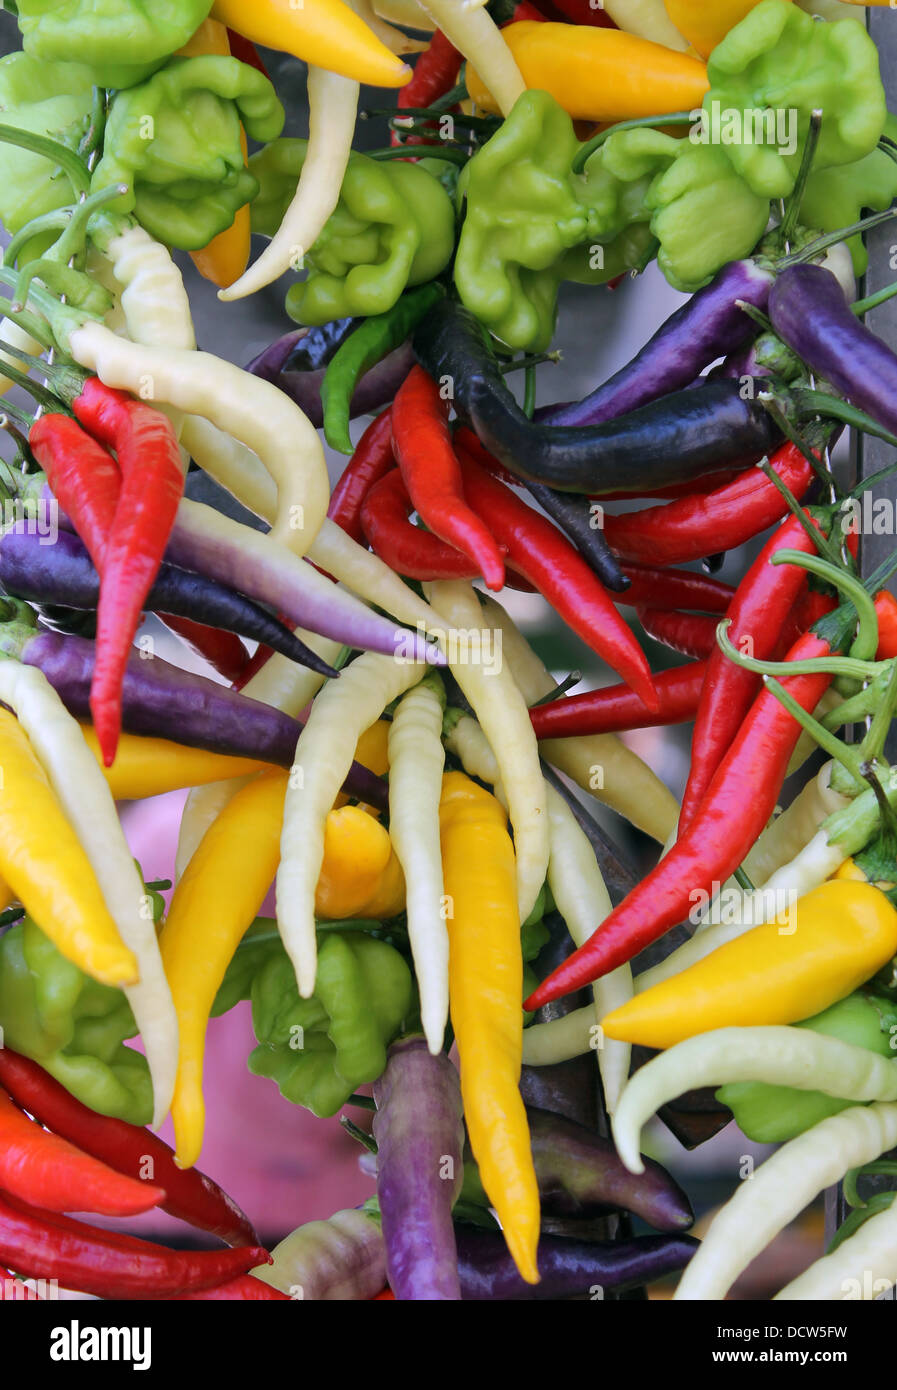 Background of colorful chili and bell peppers. Stock Photo